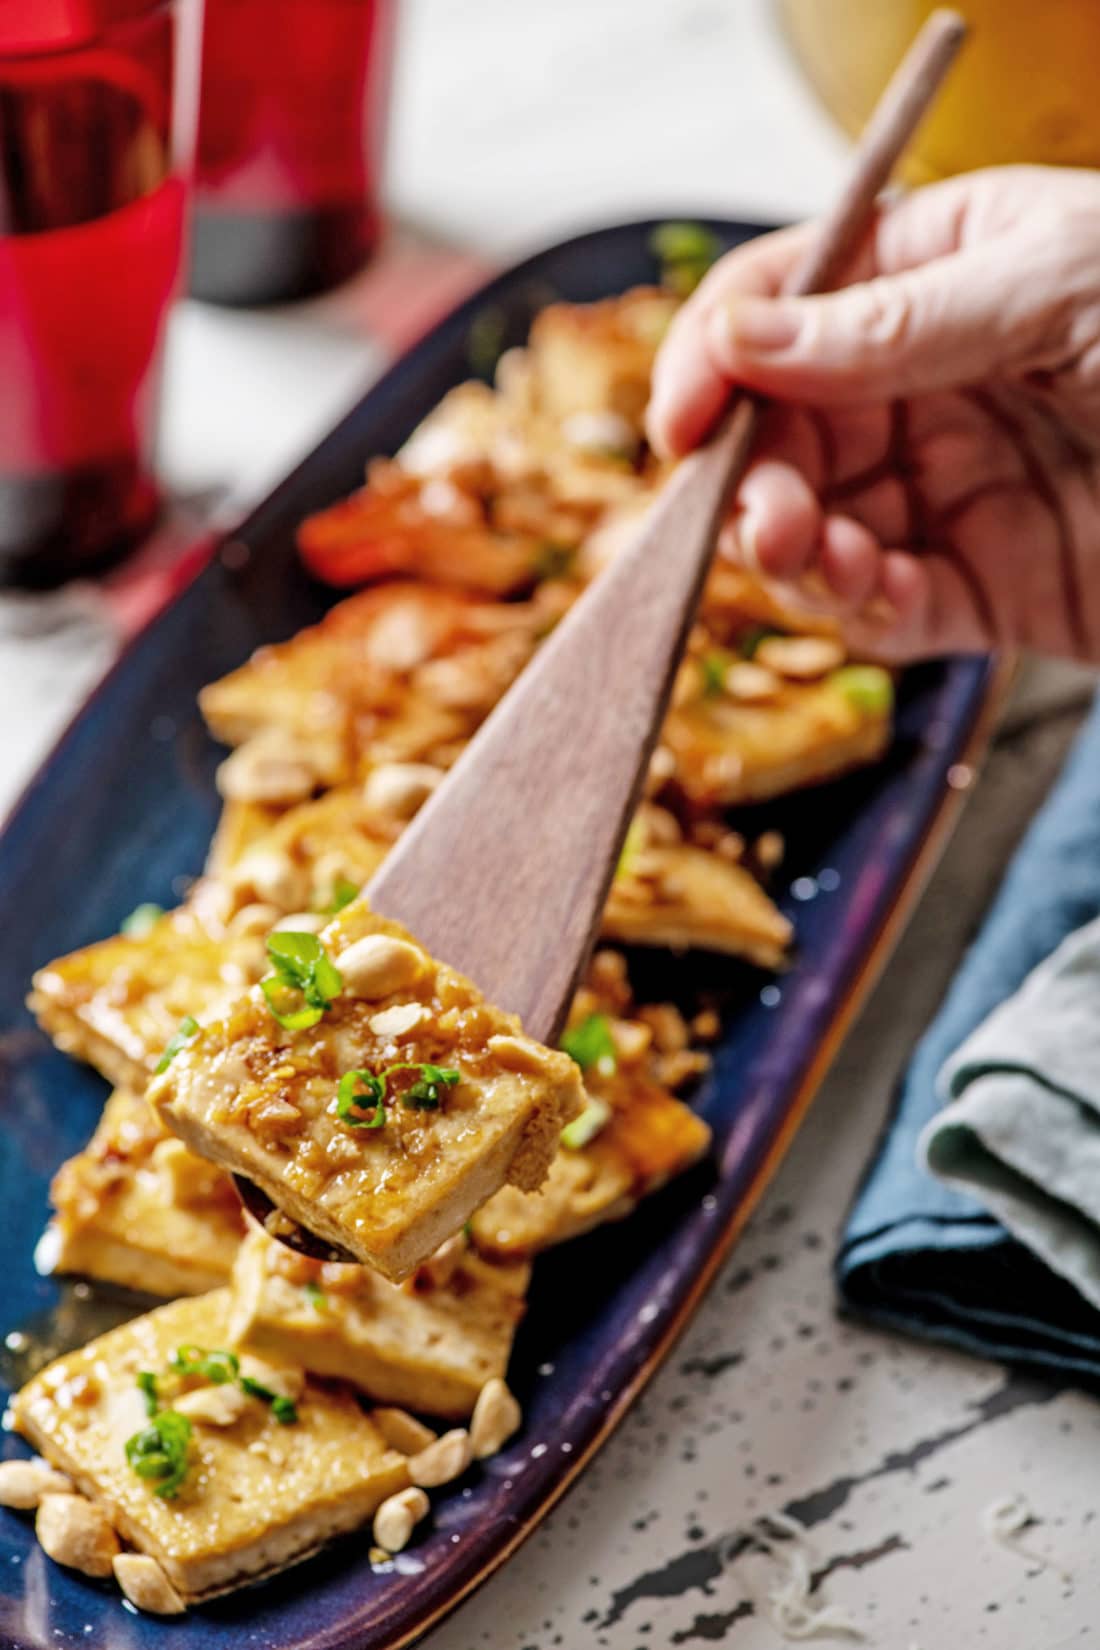 Spicy, Sweet and Nutty Tofu